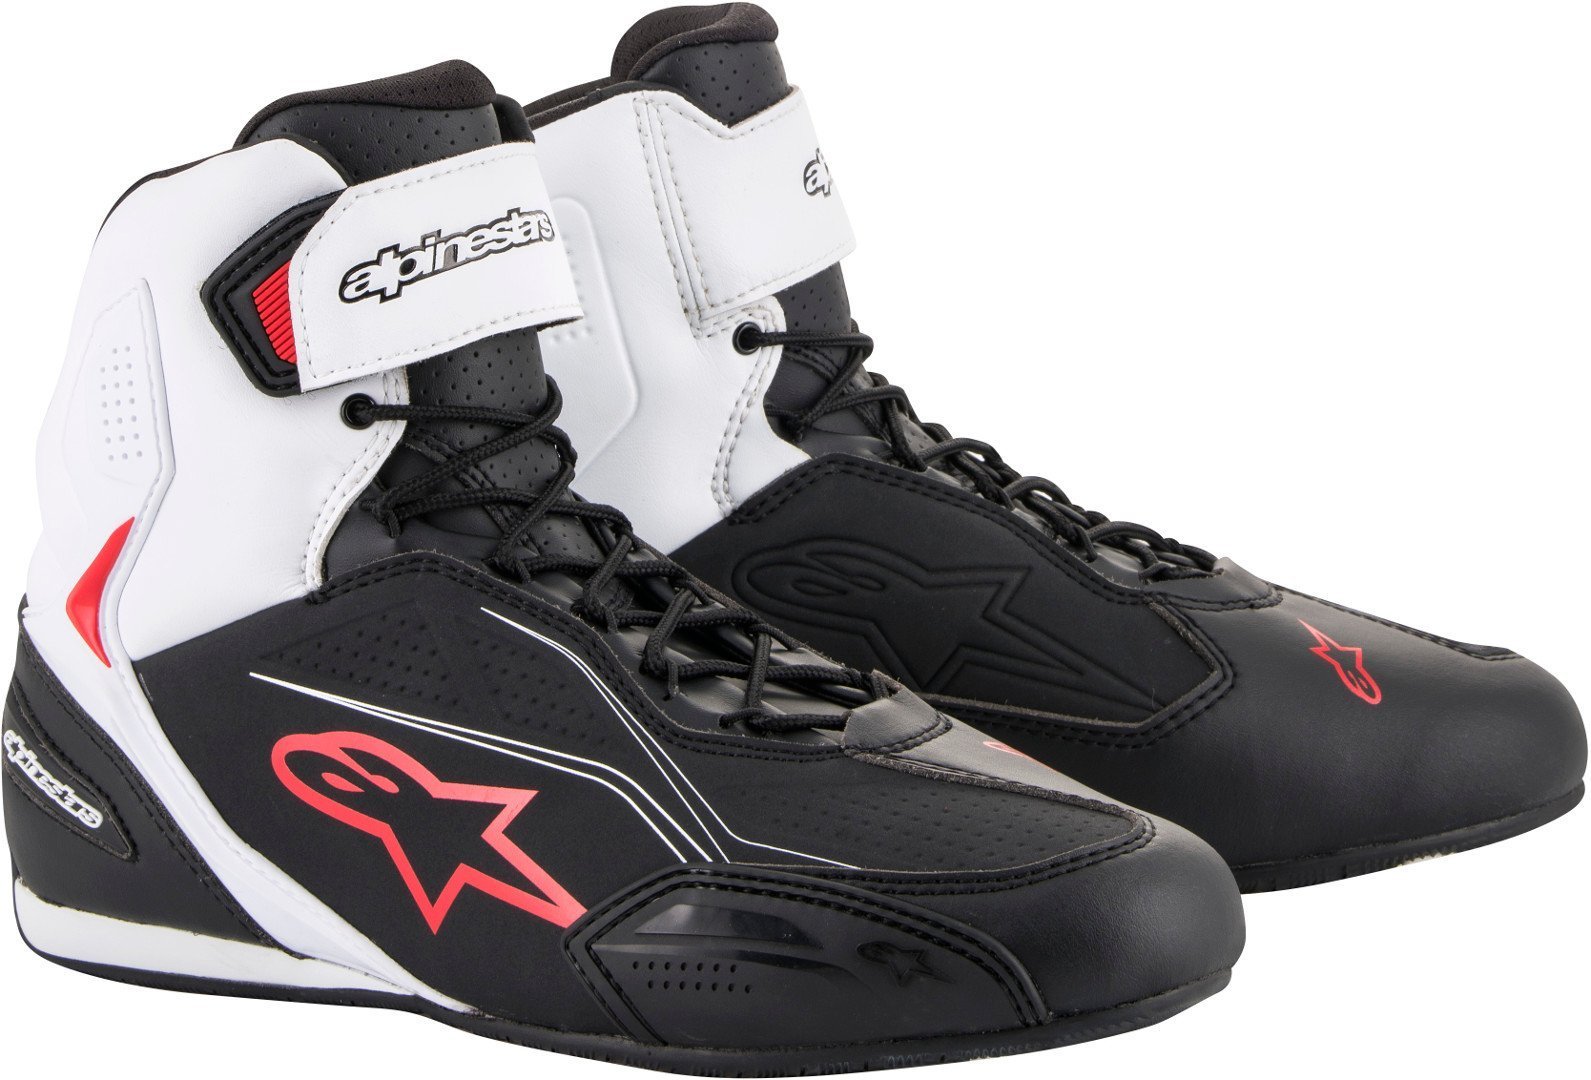 Alpinestars Faster-3 Motorcycle Shoes, black-white-red, Size 45, black-white-red, Size 45